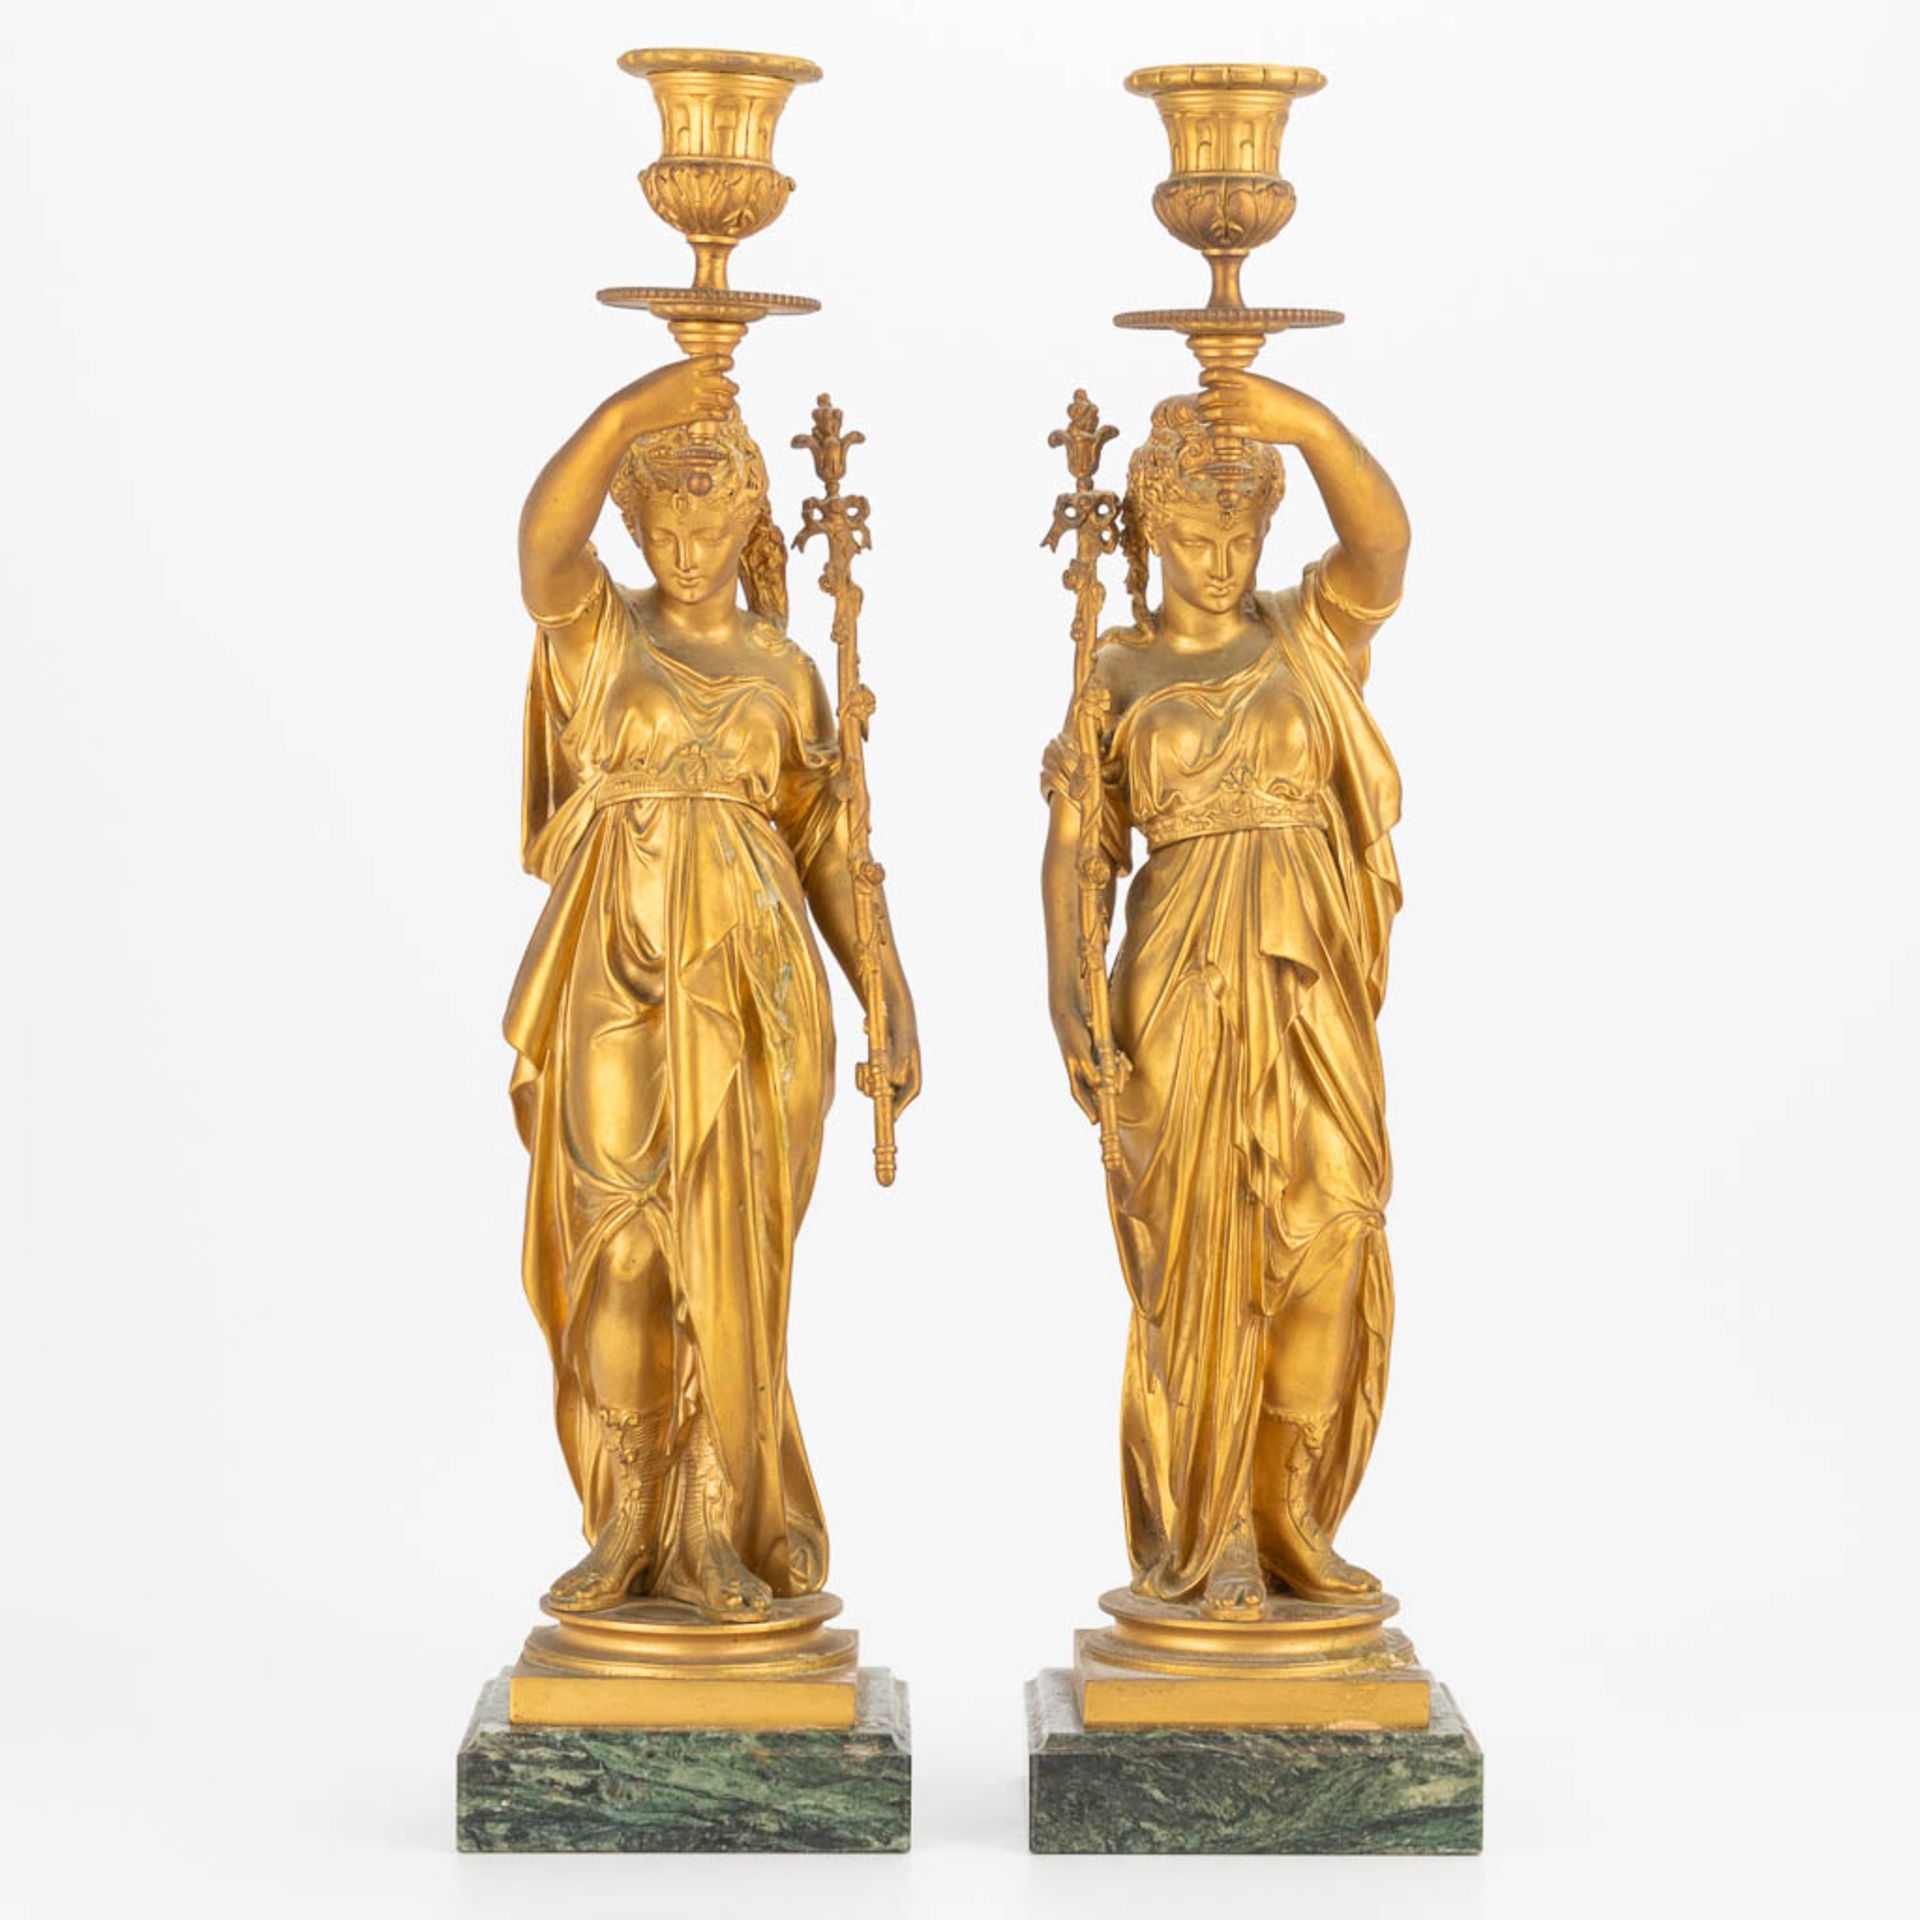 A pair of candlesticks made of gilt bronze with a pair of Greek-Roman ladies, marble base. Second ha